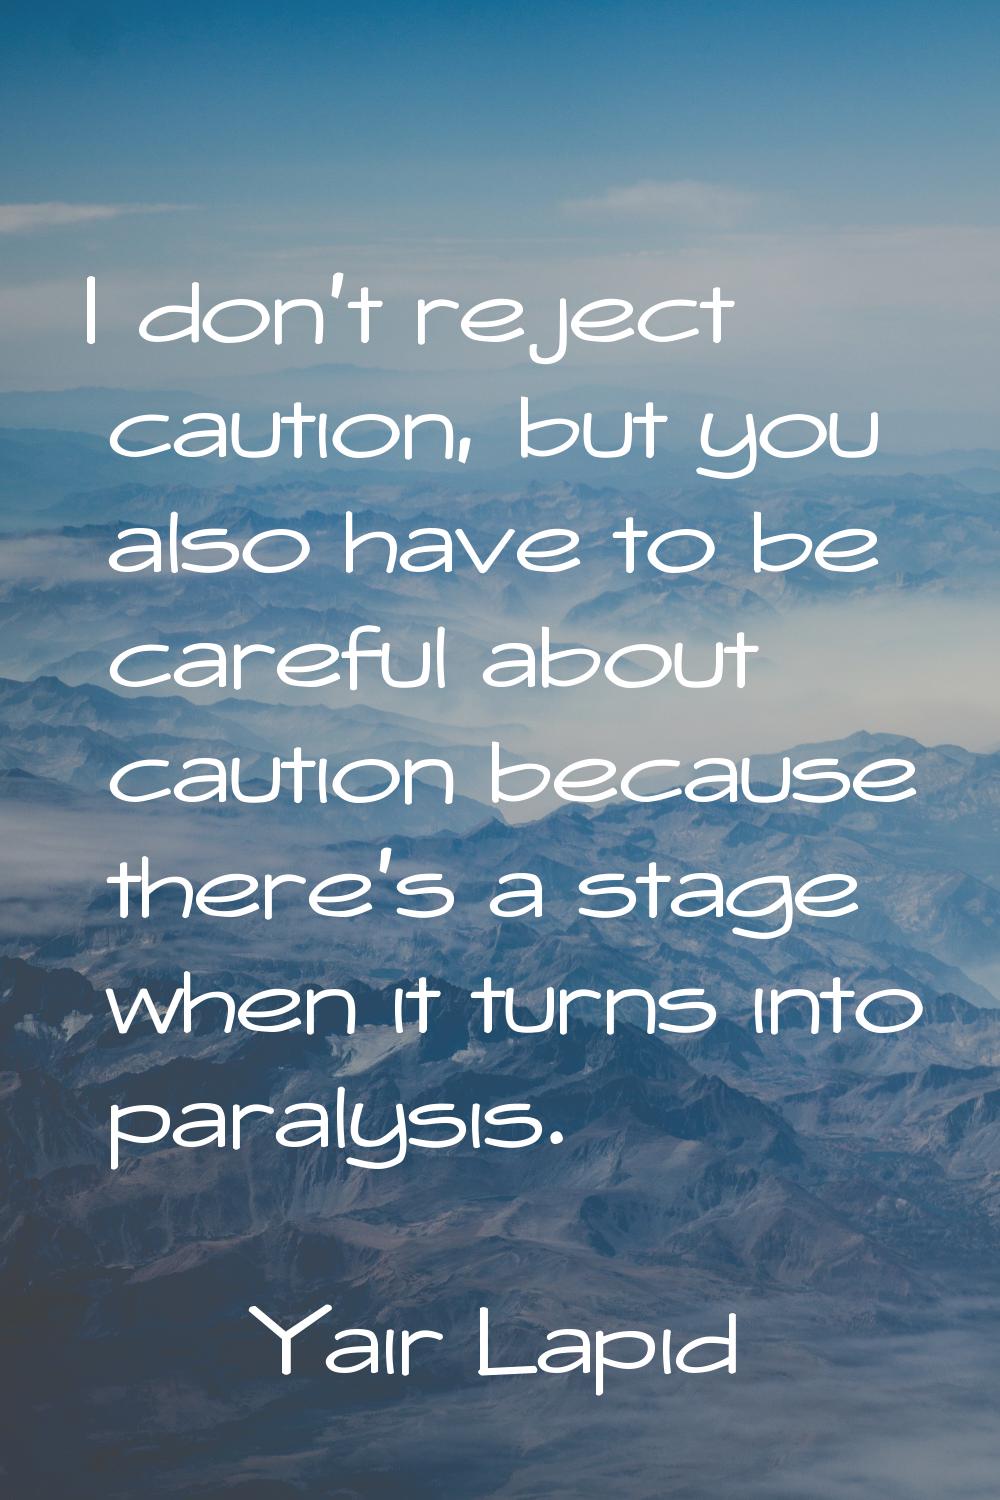 I don't reject caution, but you also have to be careful about caution because there's a stage when 